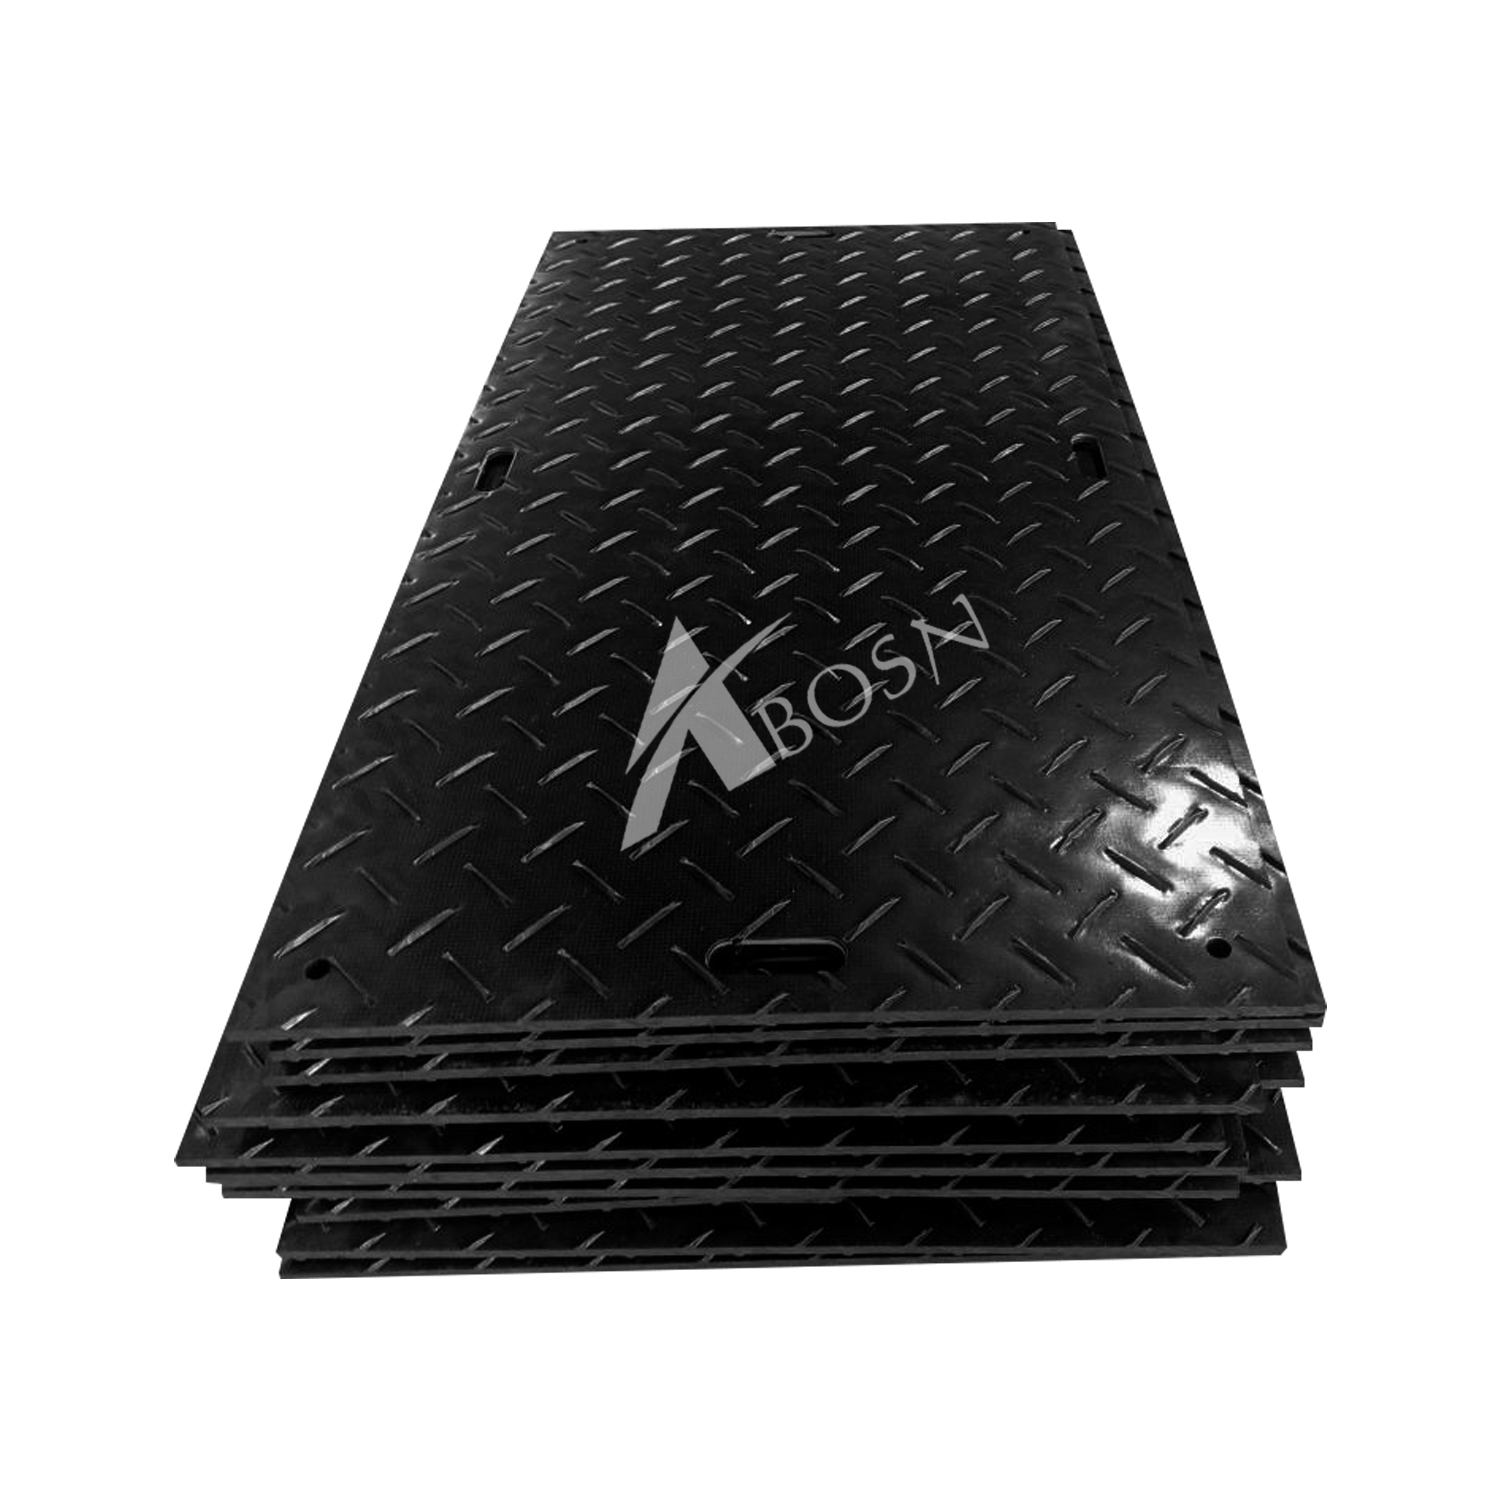 safe non-slip walkways sells ground protection mat hdpe temporary floor protection mats